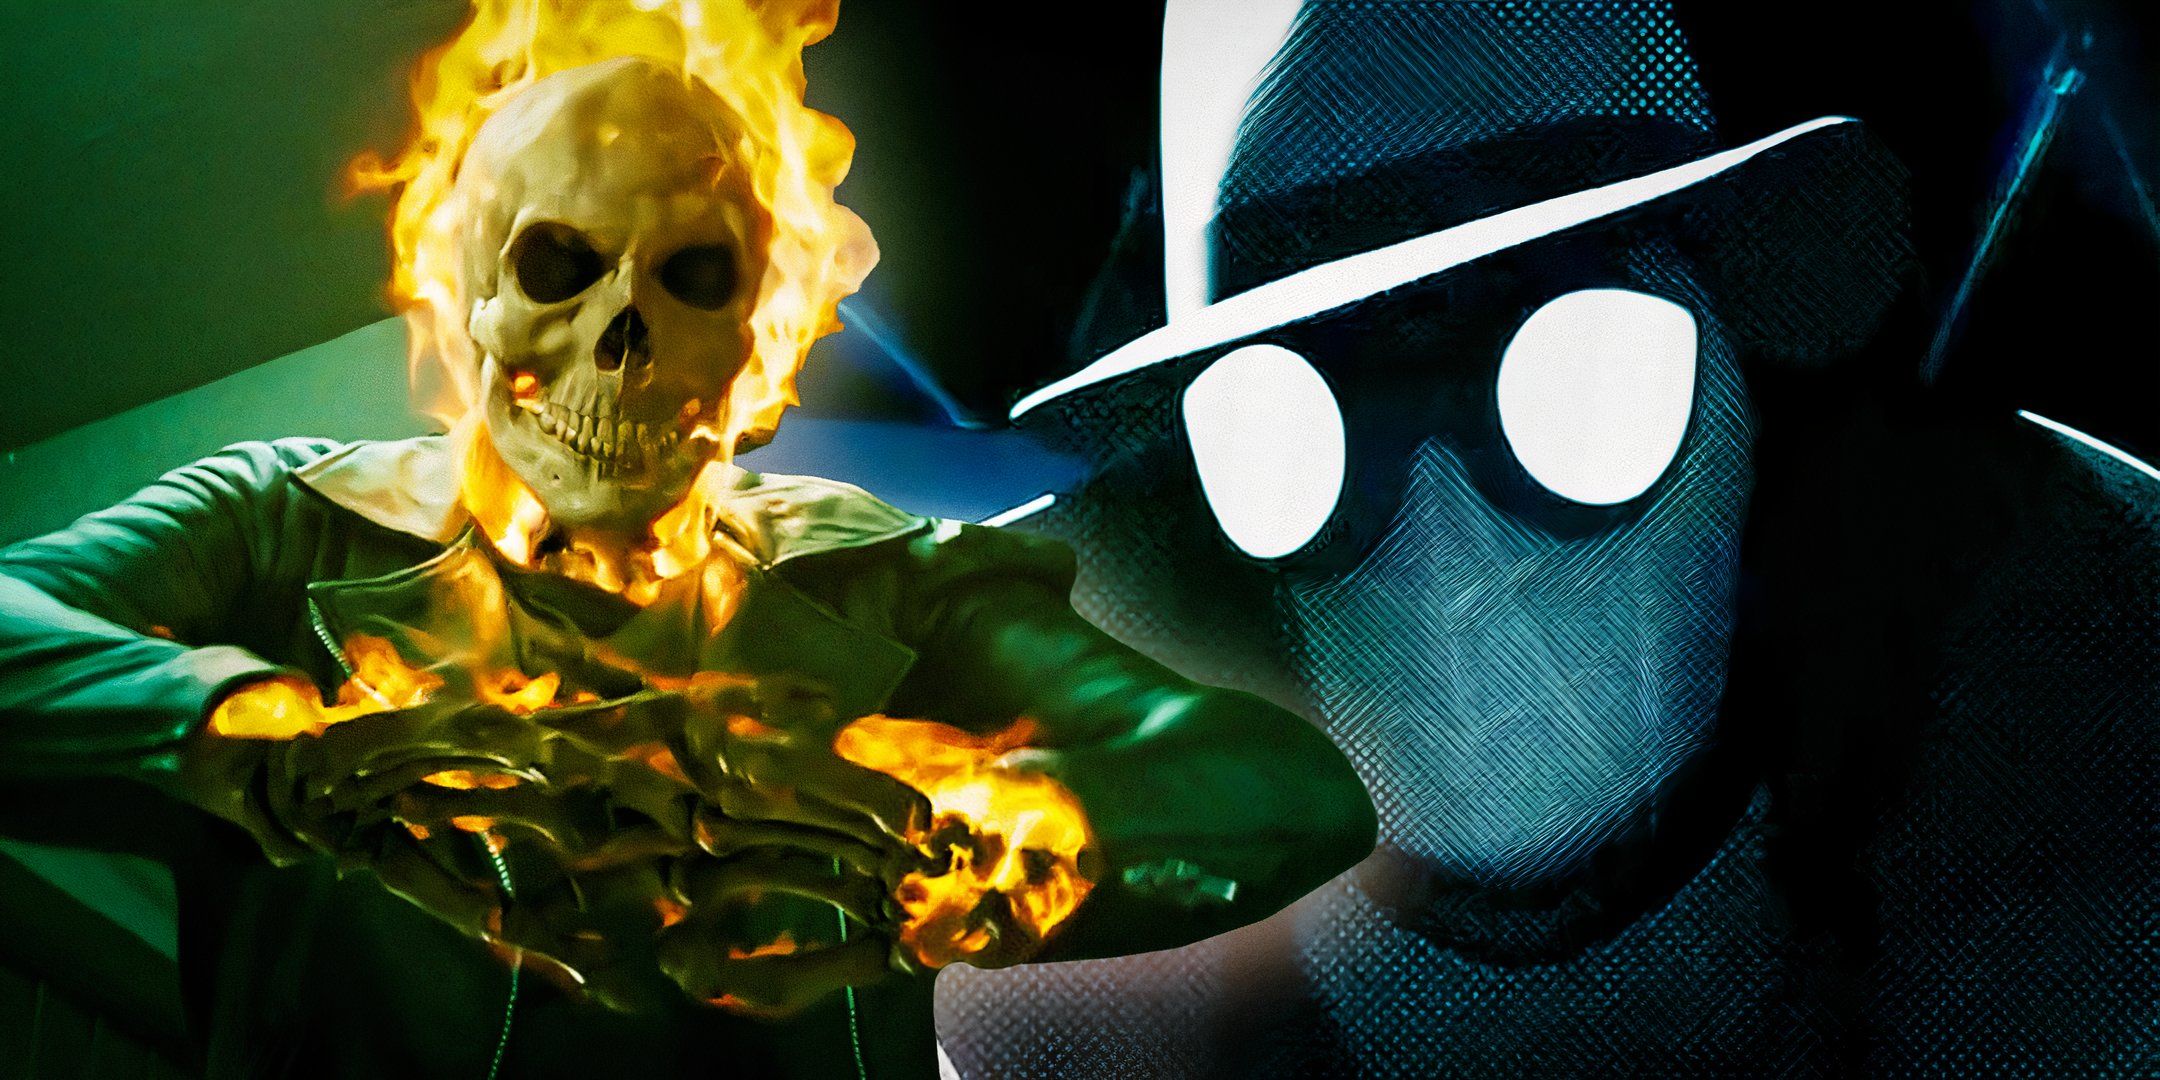 Nicolas Cage's Ghost Rider next to the animated version of Spider-Man Noir